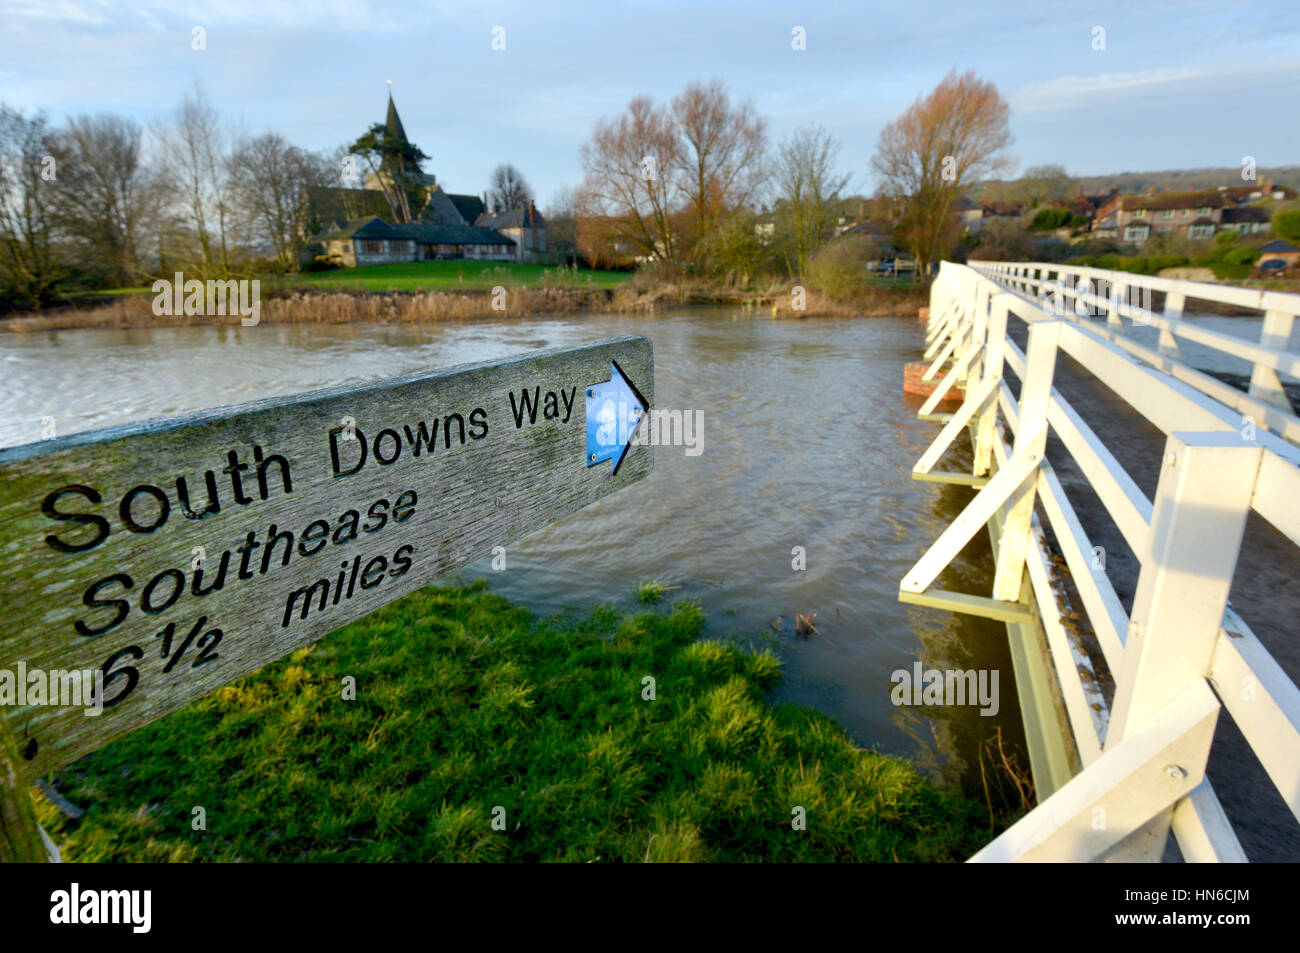 South Downs way crossing the Cuckmere river in Alfriston, East Sussex. Stock Photo